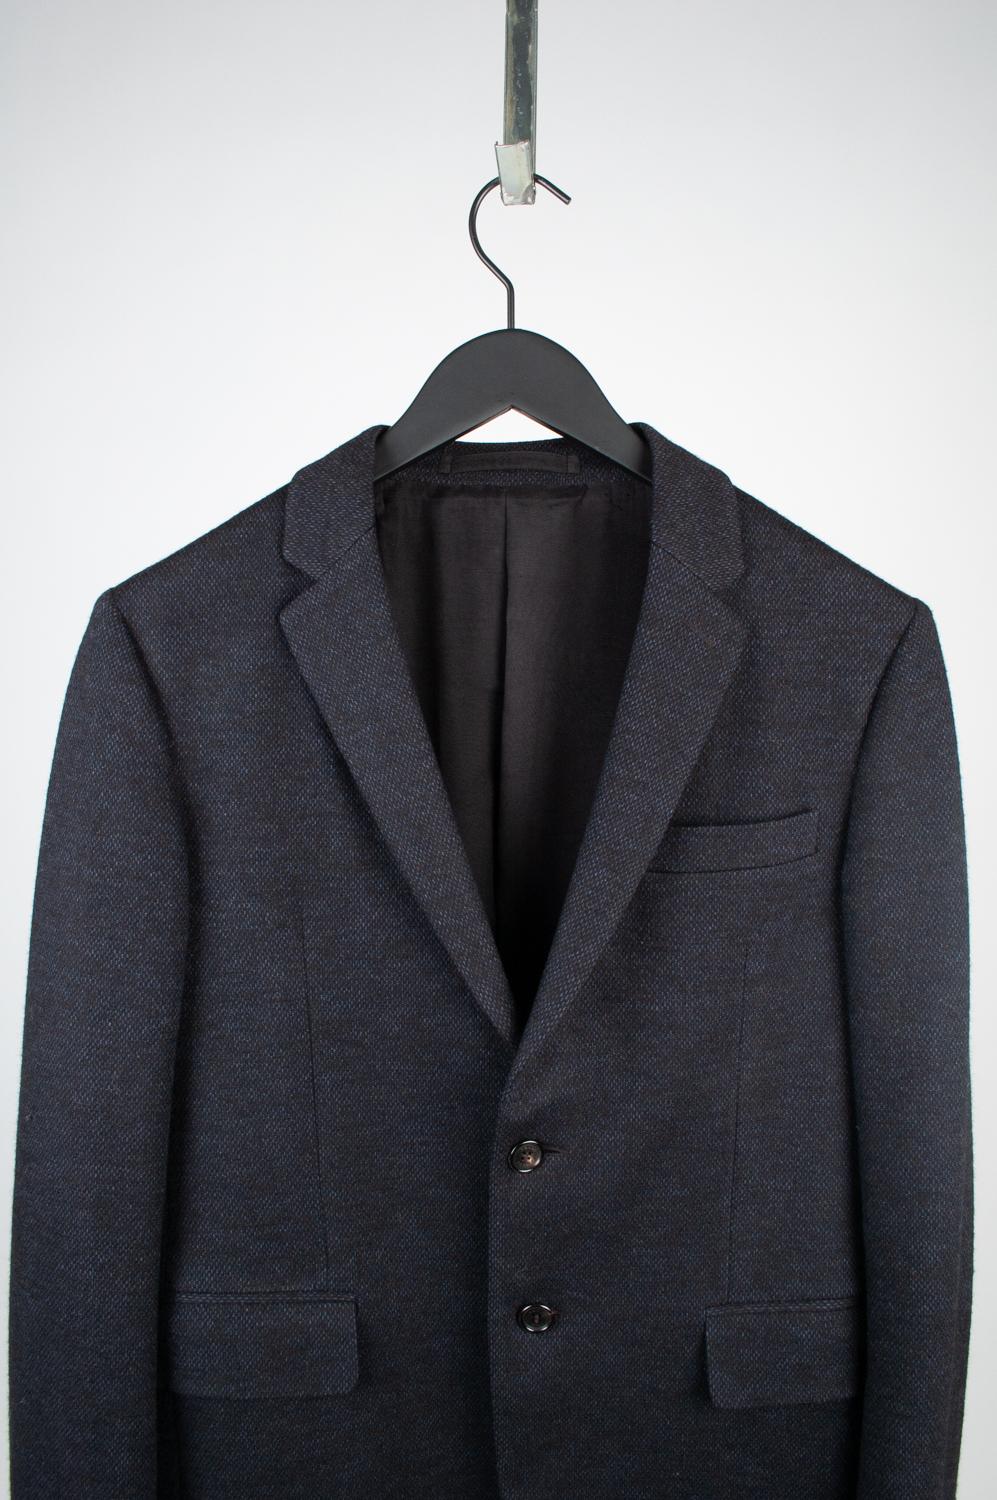 100% genuine Prada Men Blazer, S624
Color: blue/black
(An actual color may a bit vary due to individual computer screen interpretation)
Material: 65% wool, 35% cotton
Tag size: ITA 48 (Medium)
This jacket is great quality item. Rate 9 of 10,